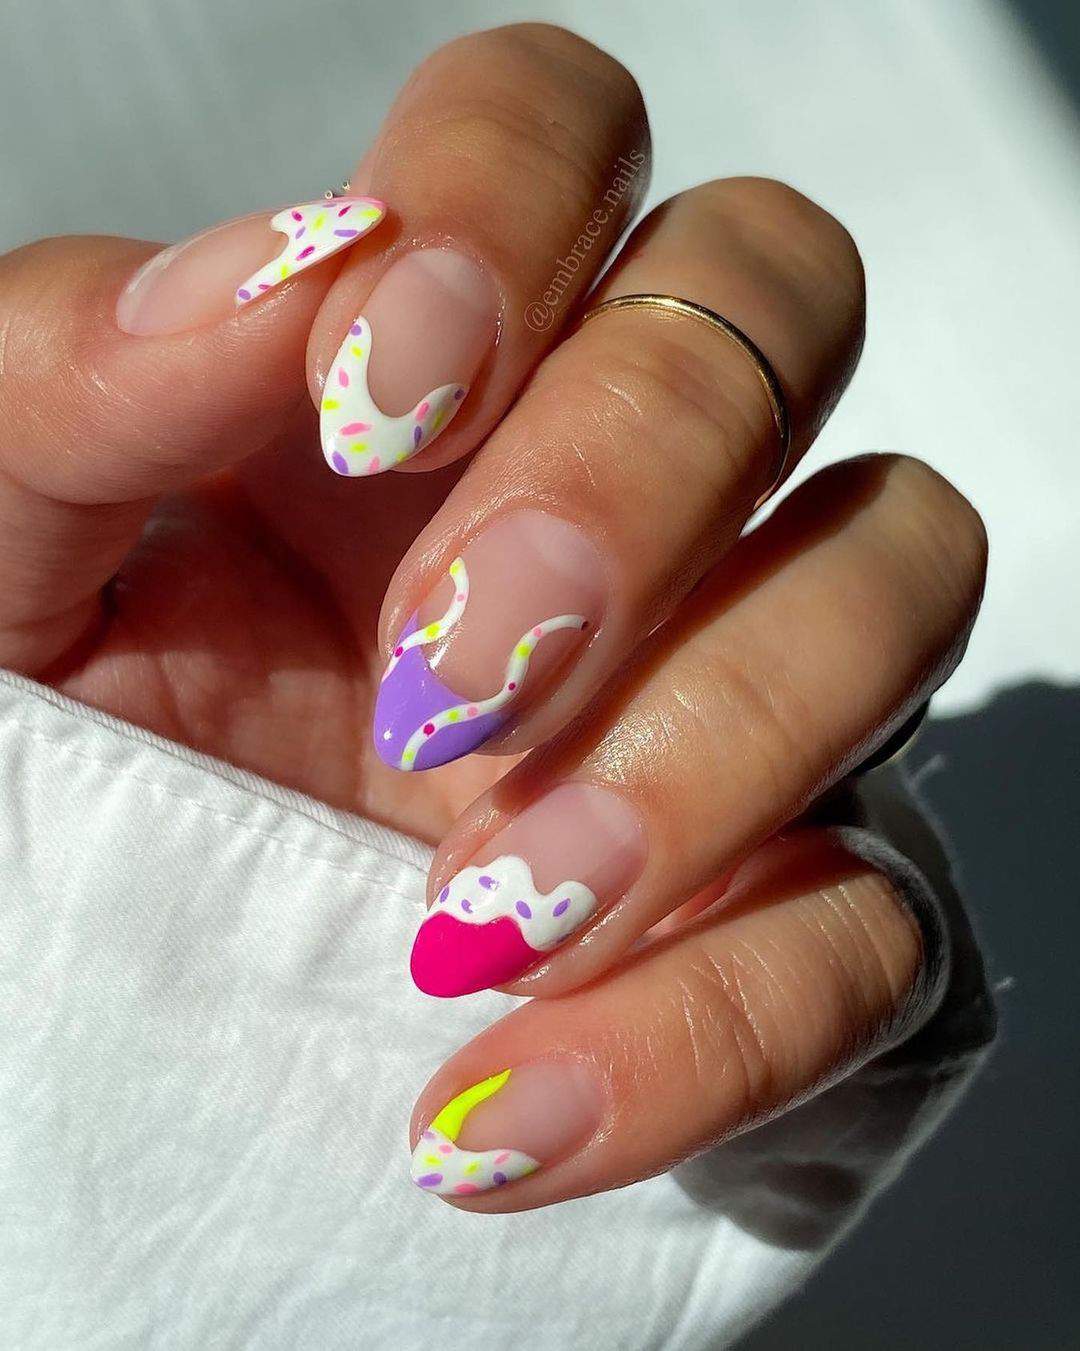 35 Cute Summer Nails To Rock For Women In 2021 images 22